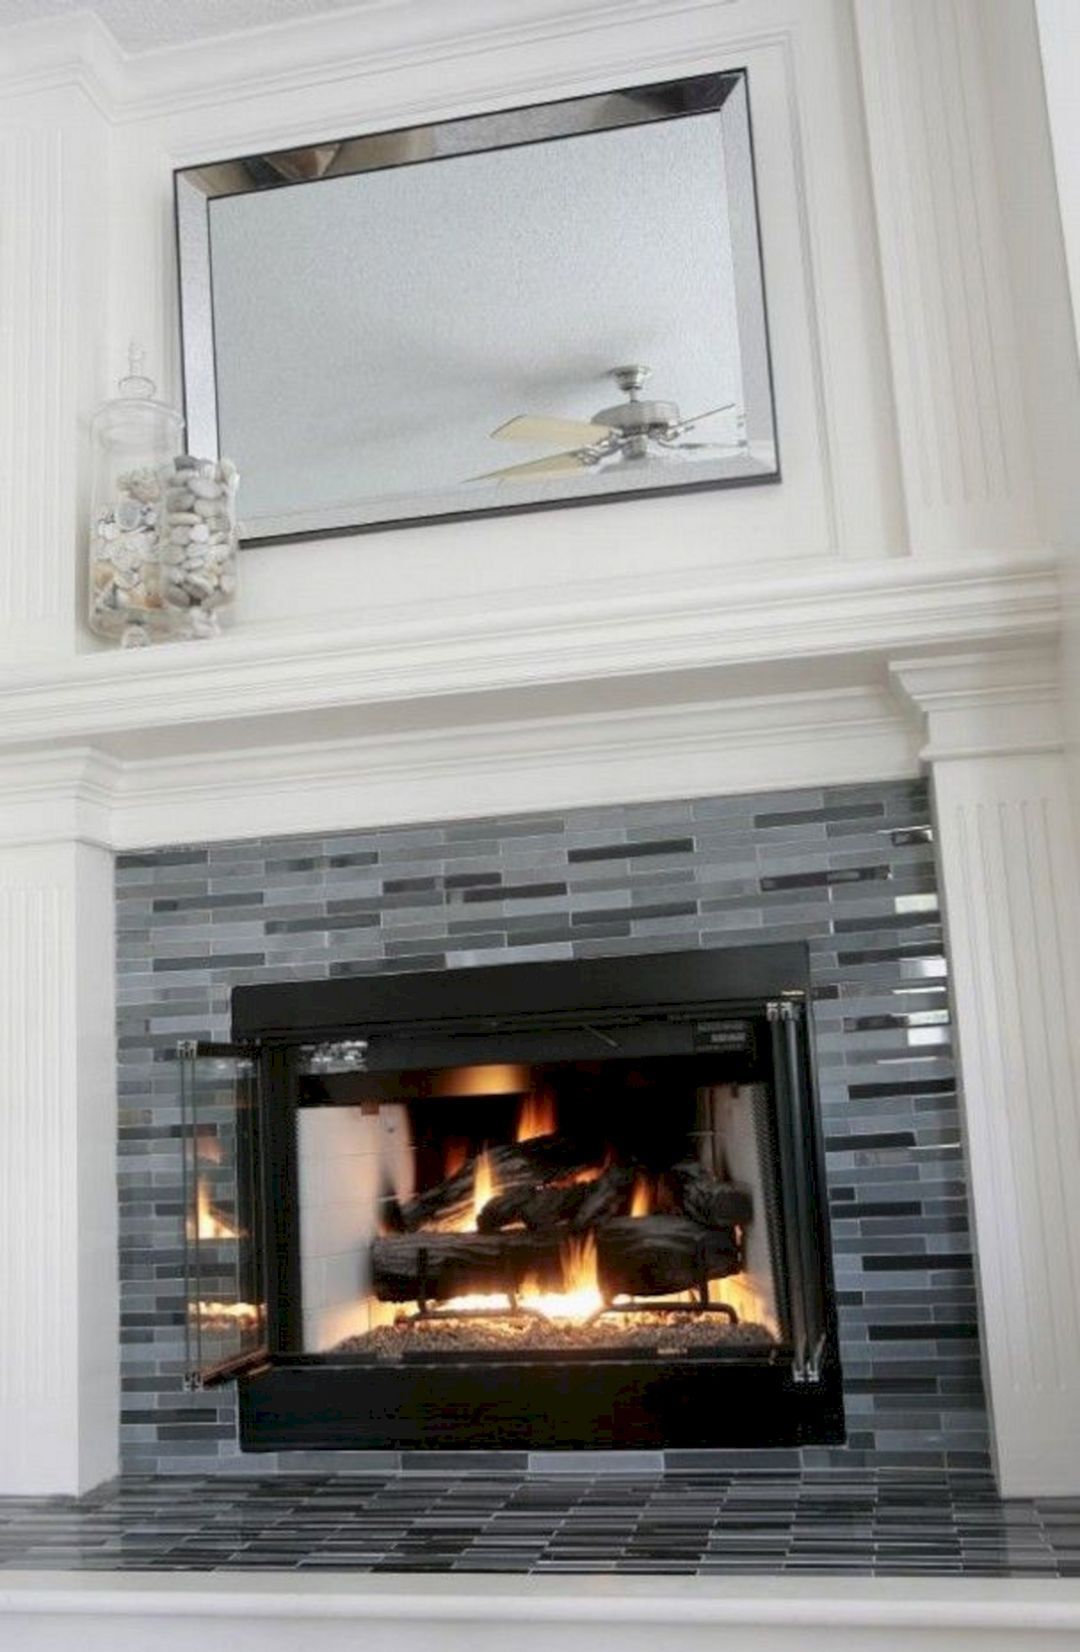 Pictures Of Tiled Fireplaces Fresh 22 Wonderful Fireplace Tile Design for Amazing Home